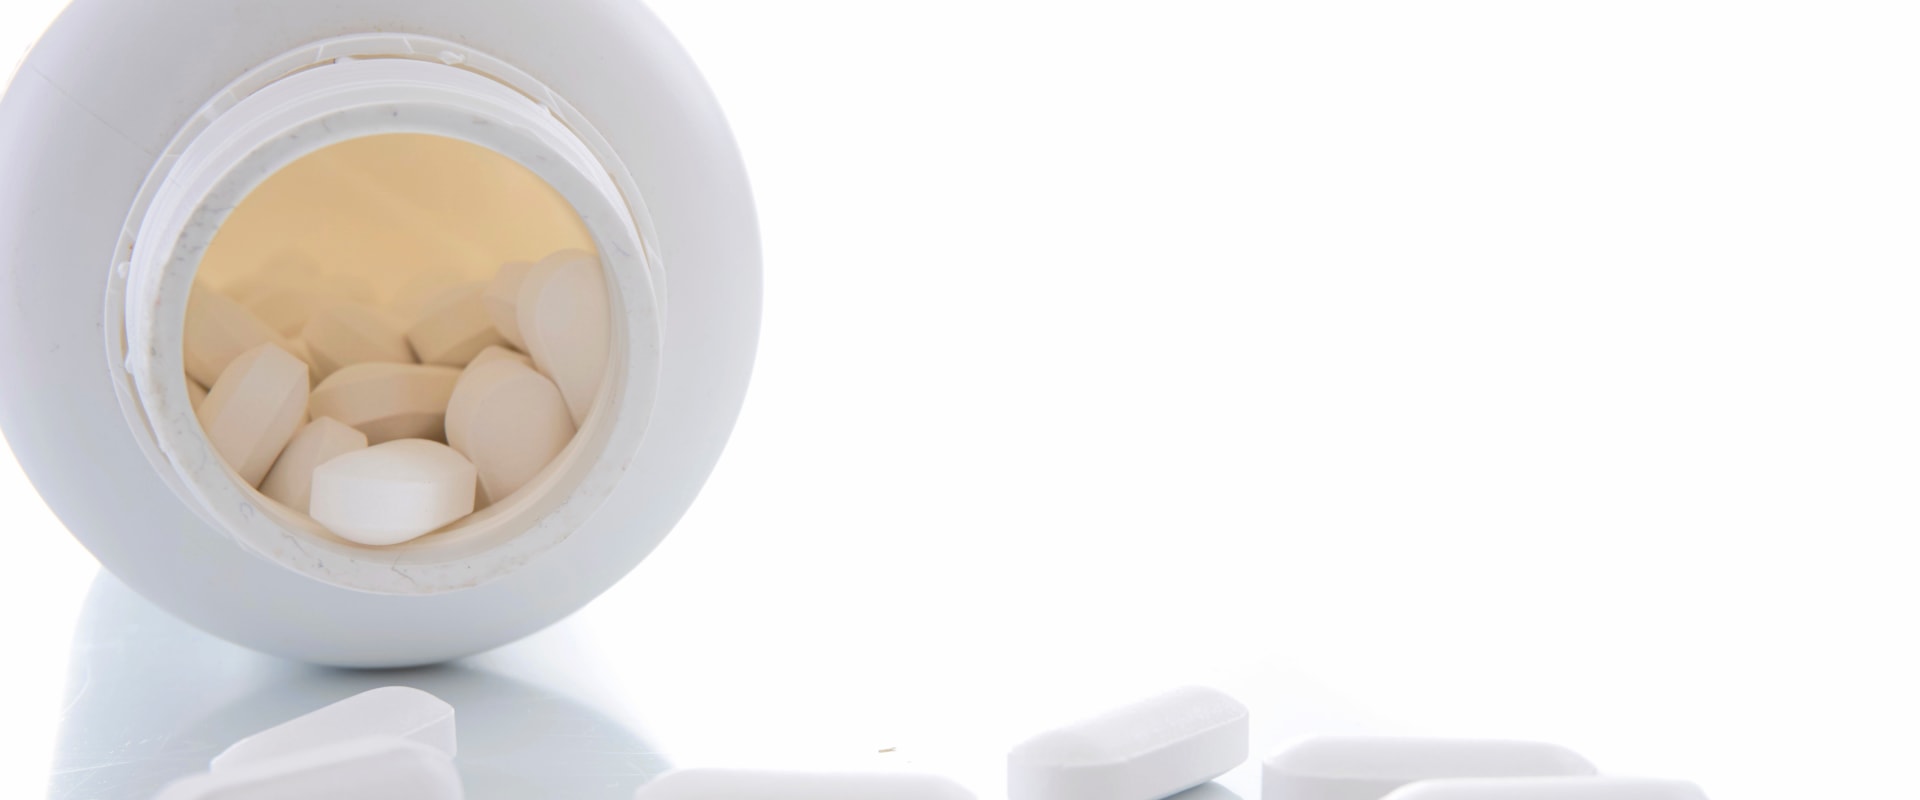 How many hours should you wait between calcium supplements?